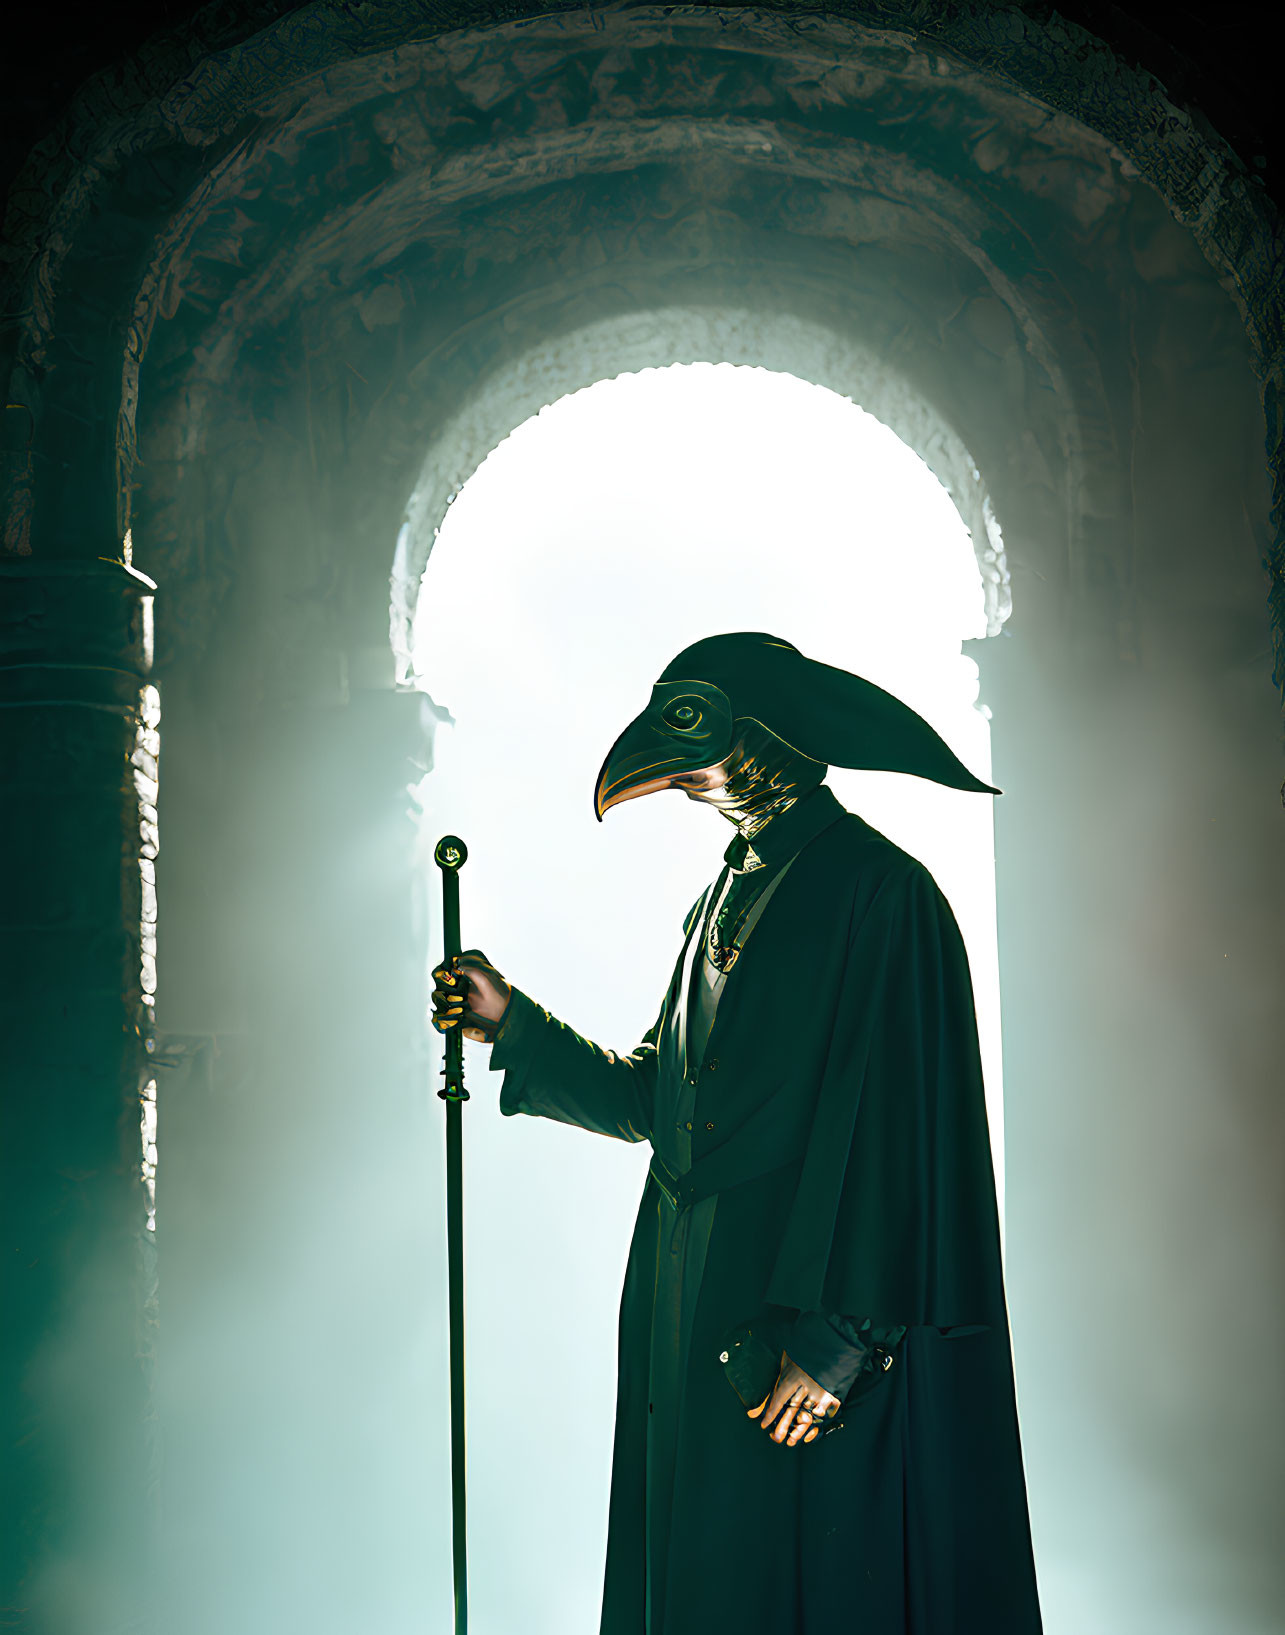 Plague doctor in beaked mask holding staff in misty hallway